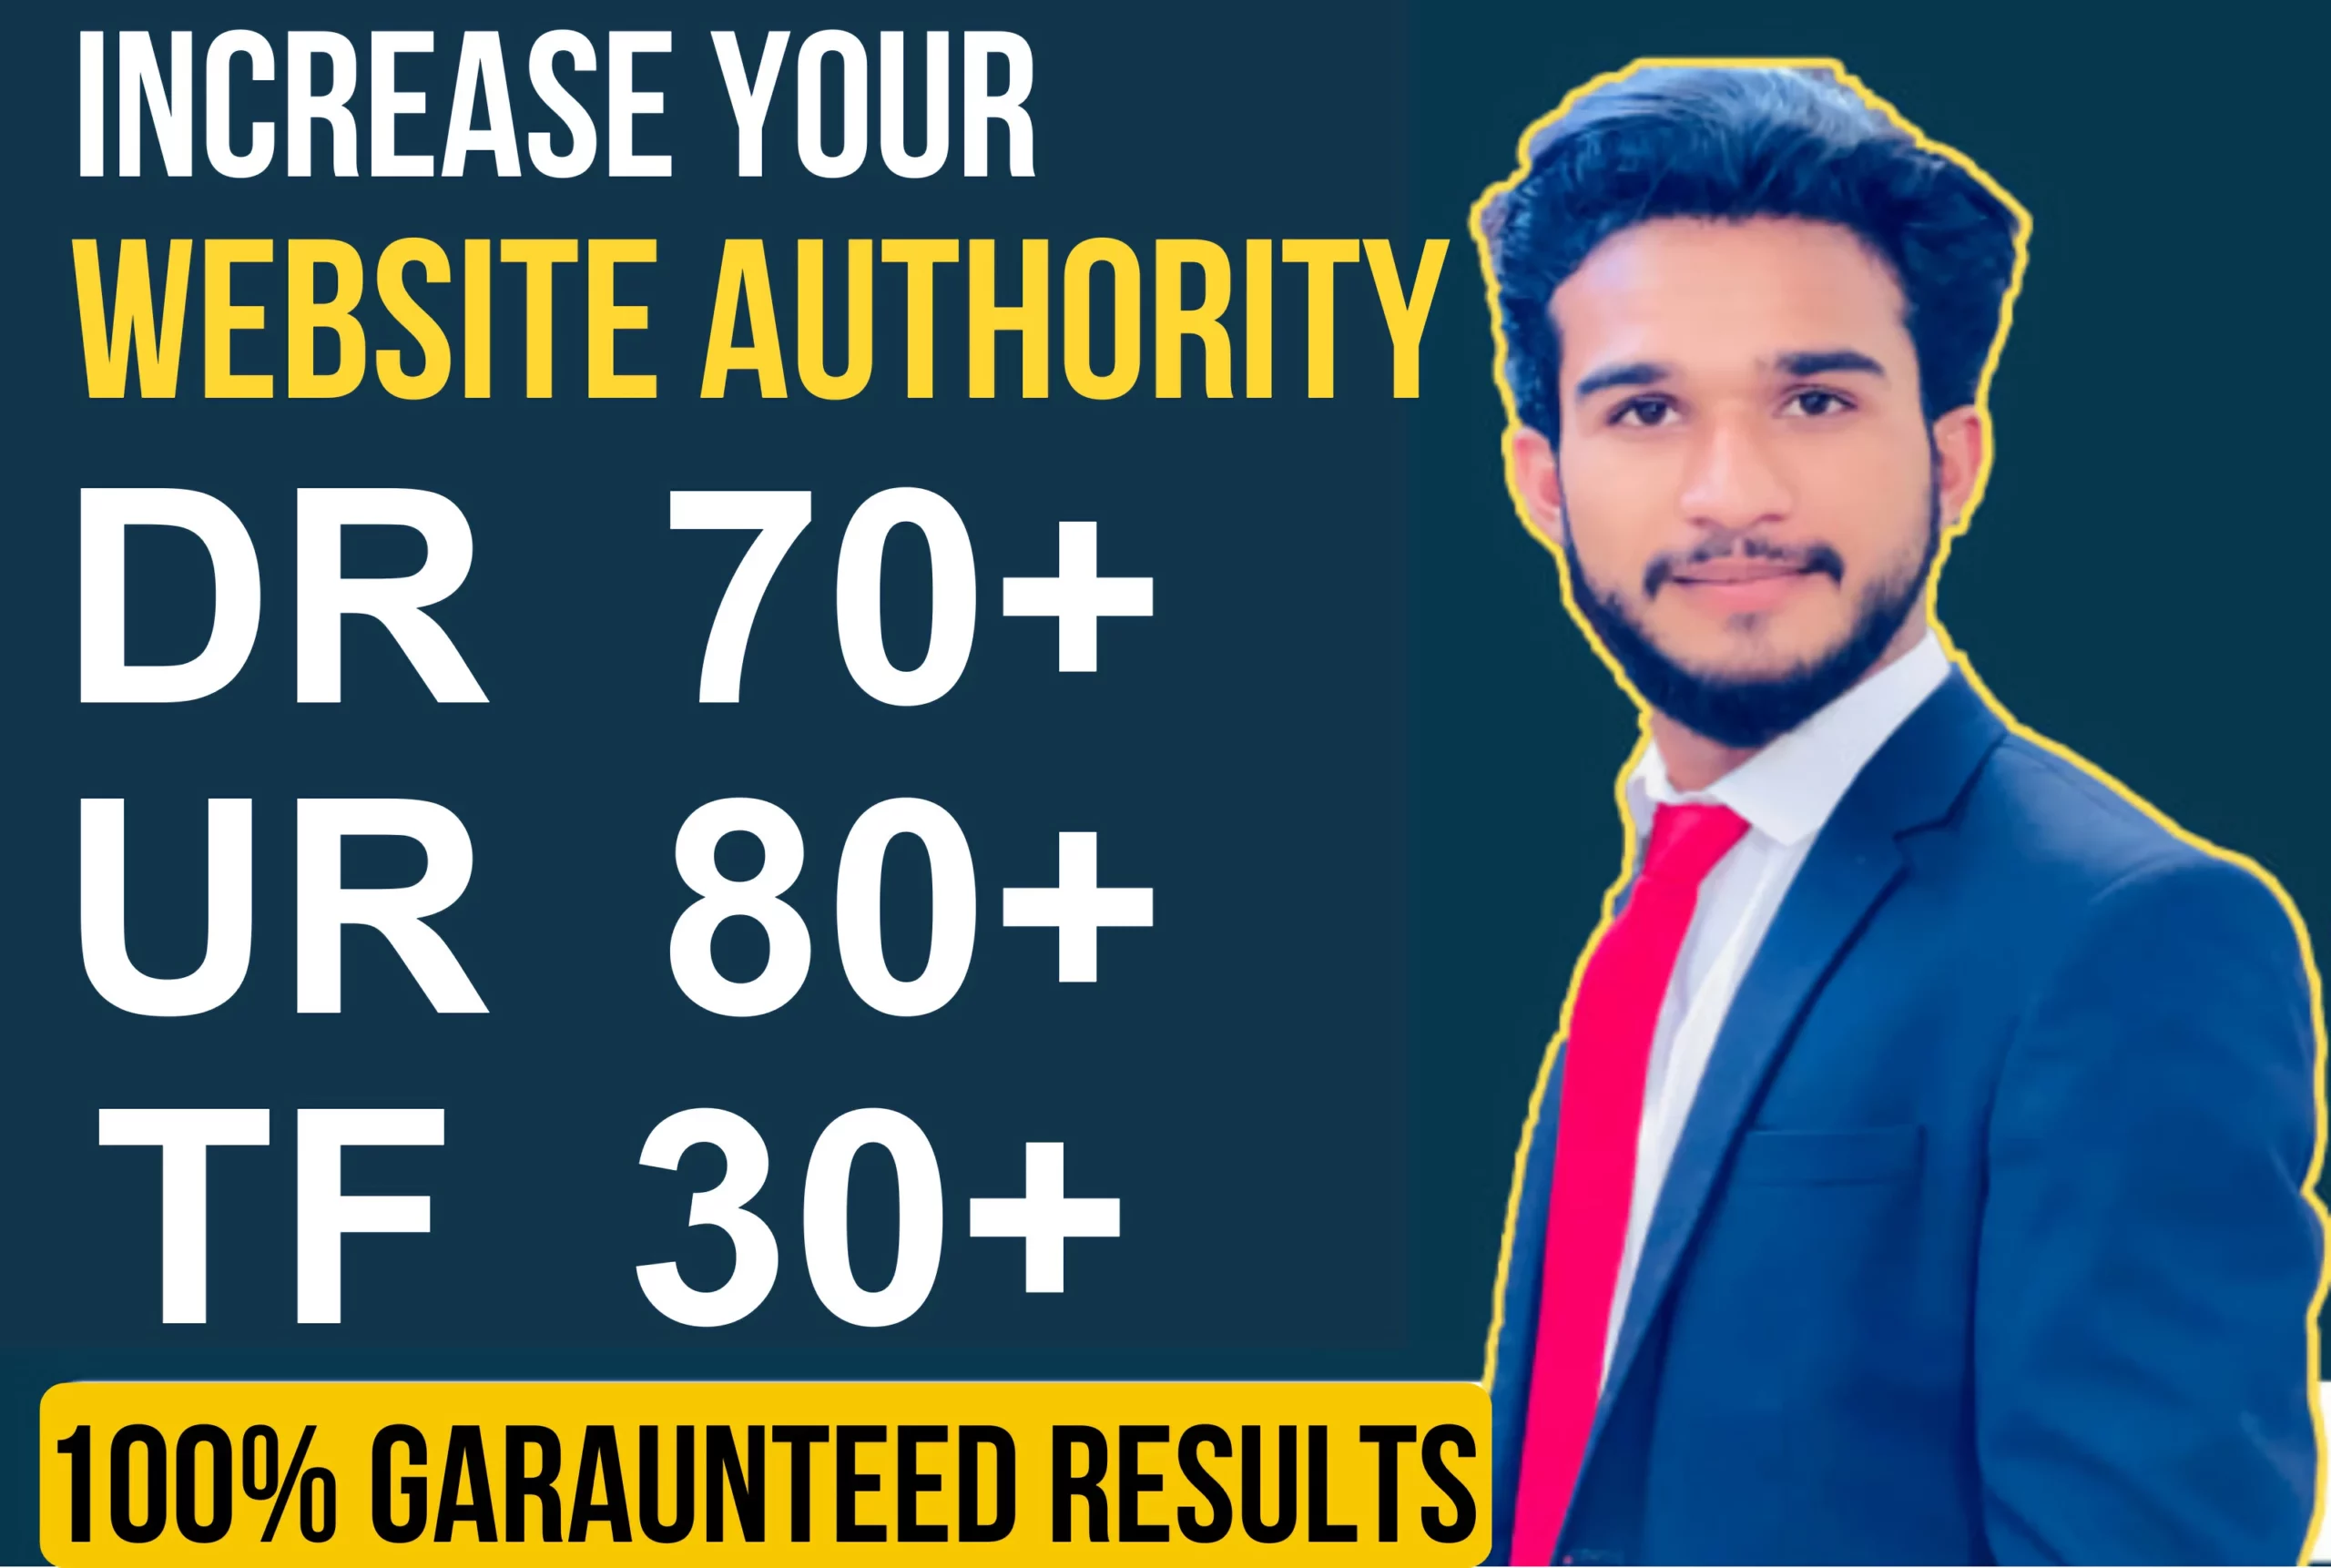 Increase domain rating ahrefs DR, url rating ahrefs ur, majestic trust flow tf | SEO Service